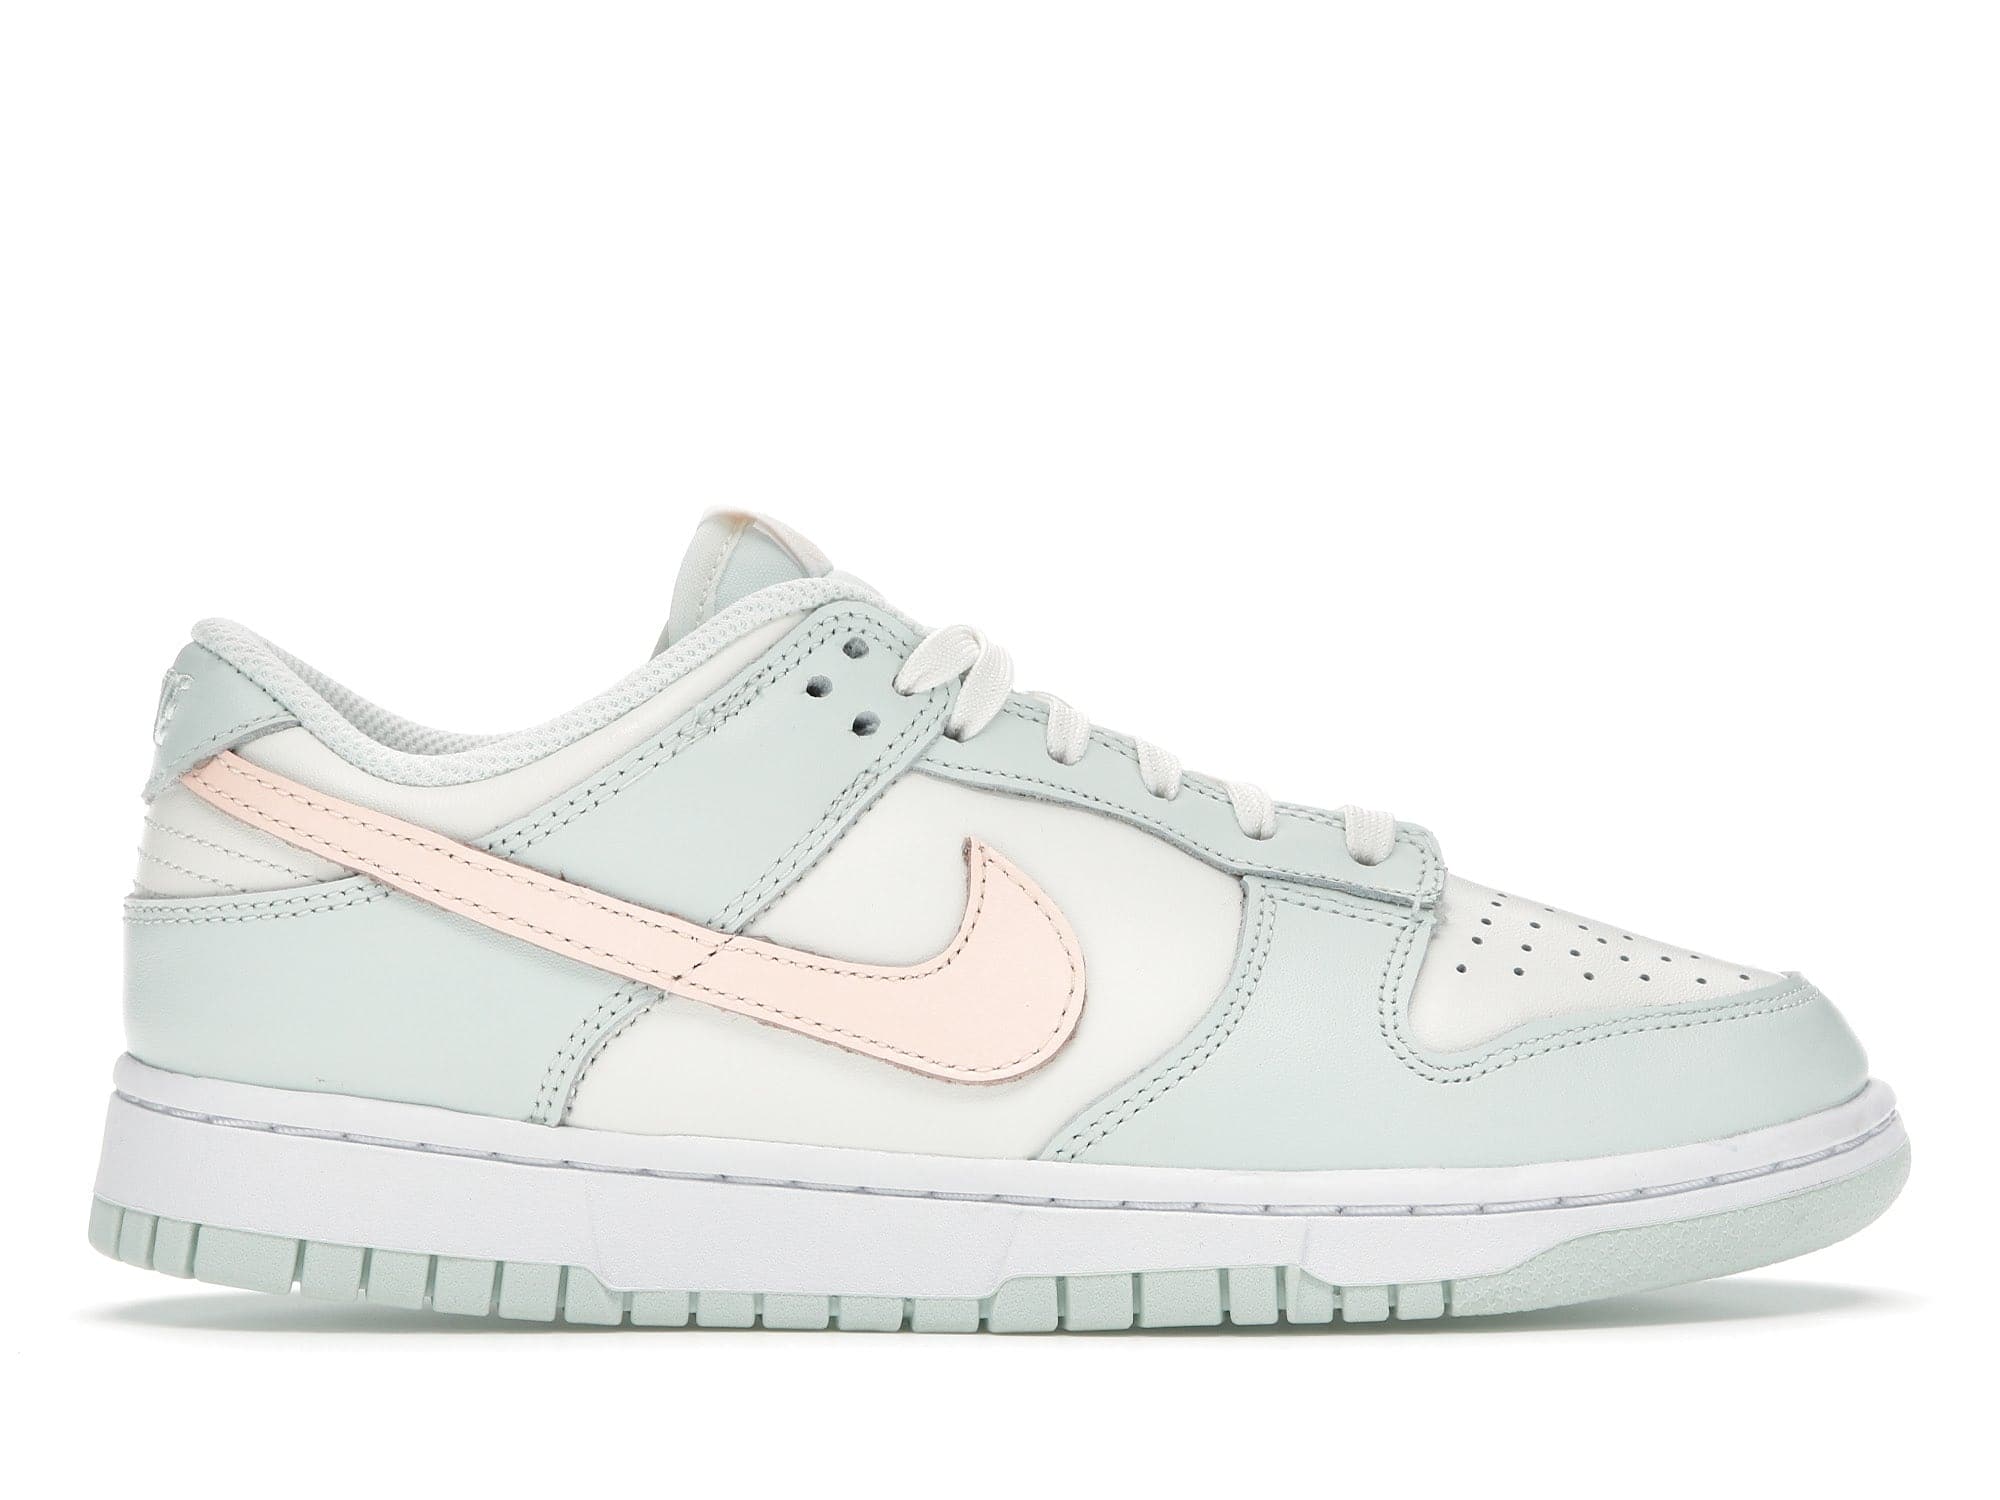 Nike Dunk Low Barely Green (Women's) - The Magnolia Park